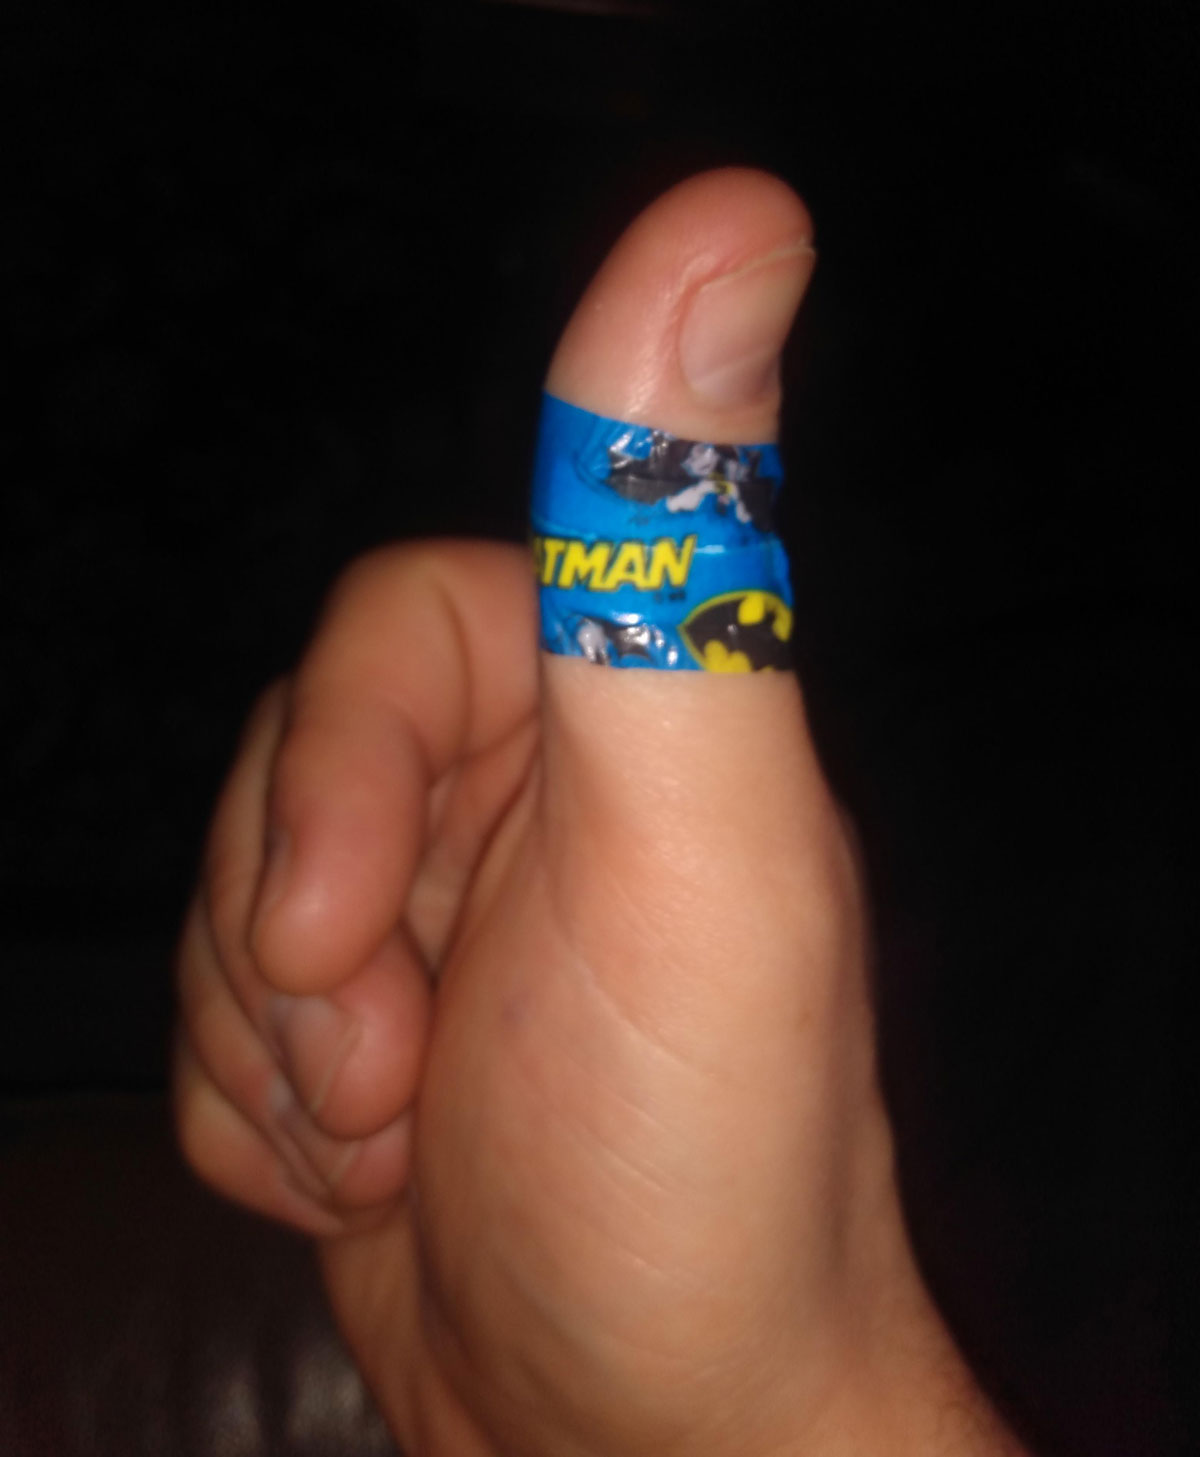 Cut my thumb in my mum's house. I'm 35 years old